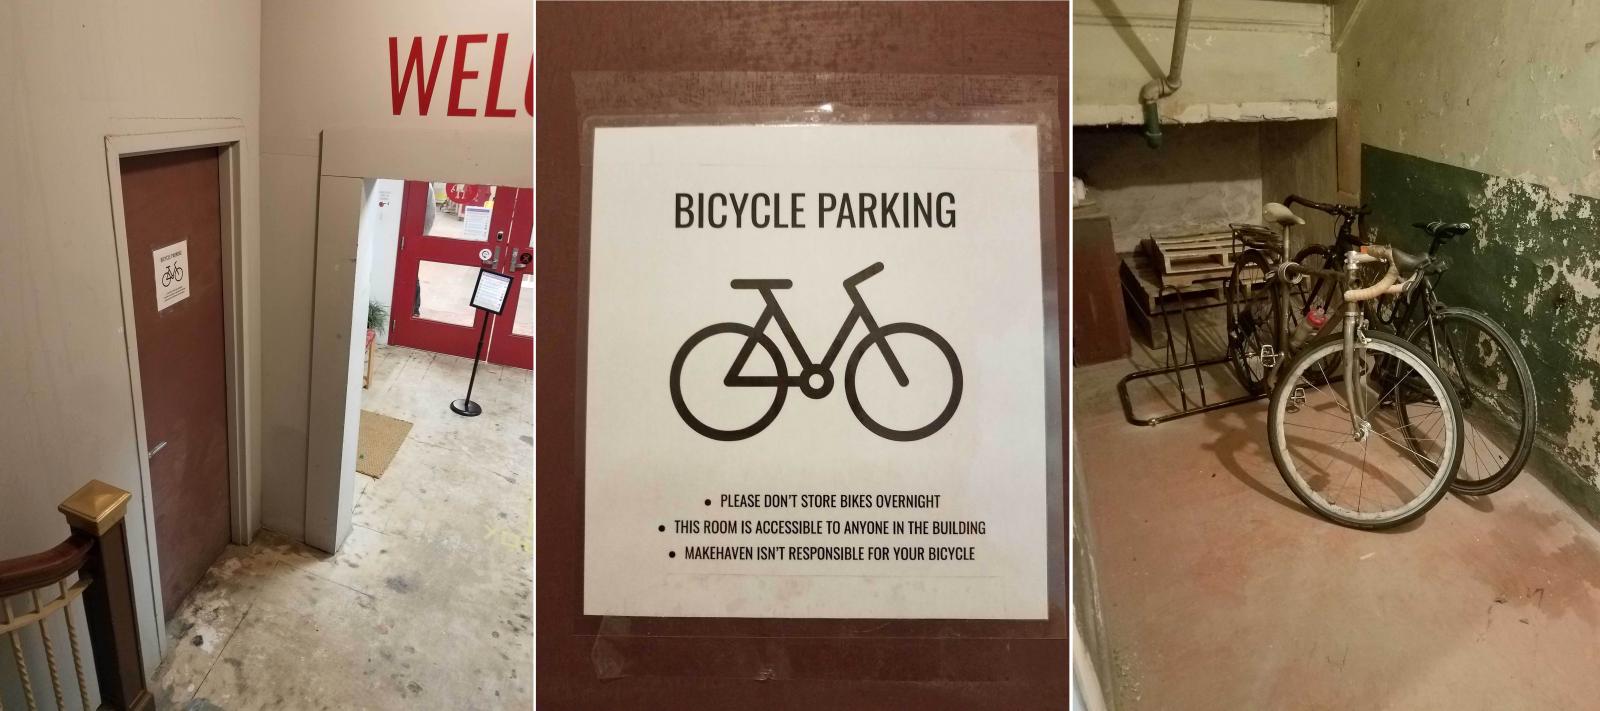 Photos of the bike storage room and bike storage rules at MakeHaven